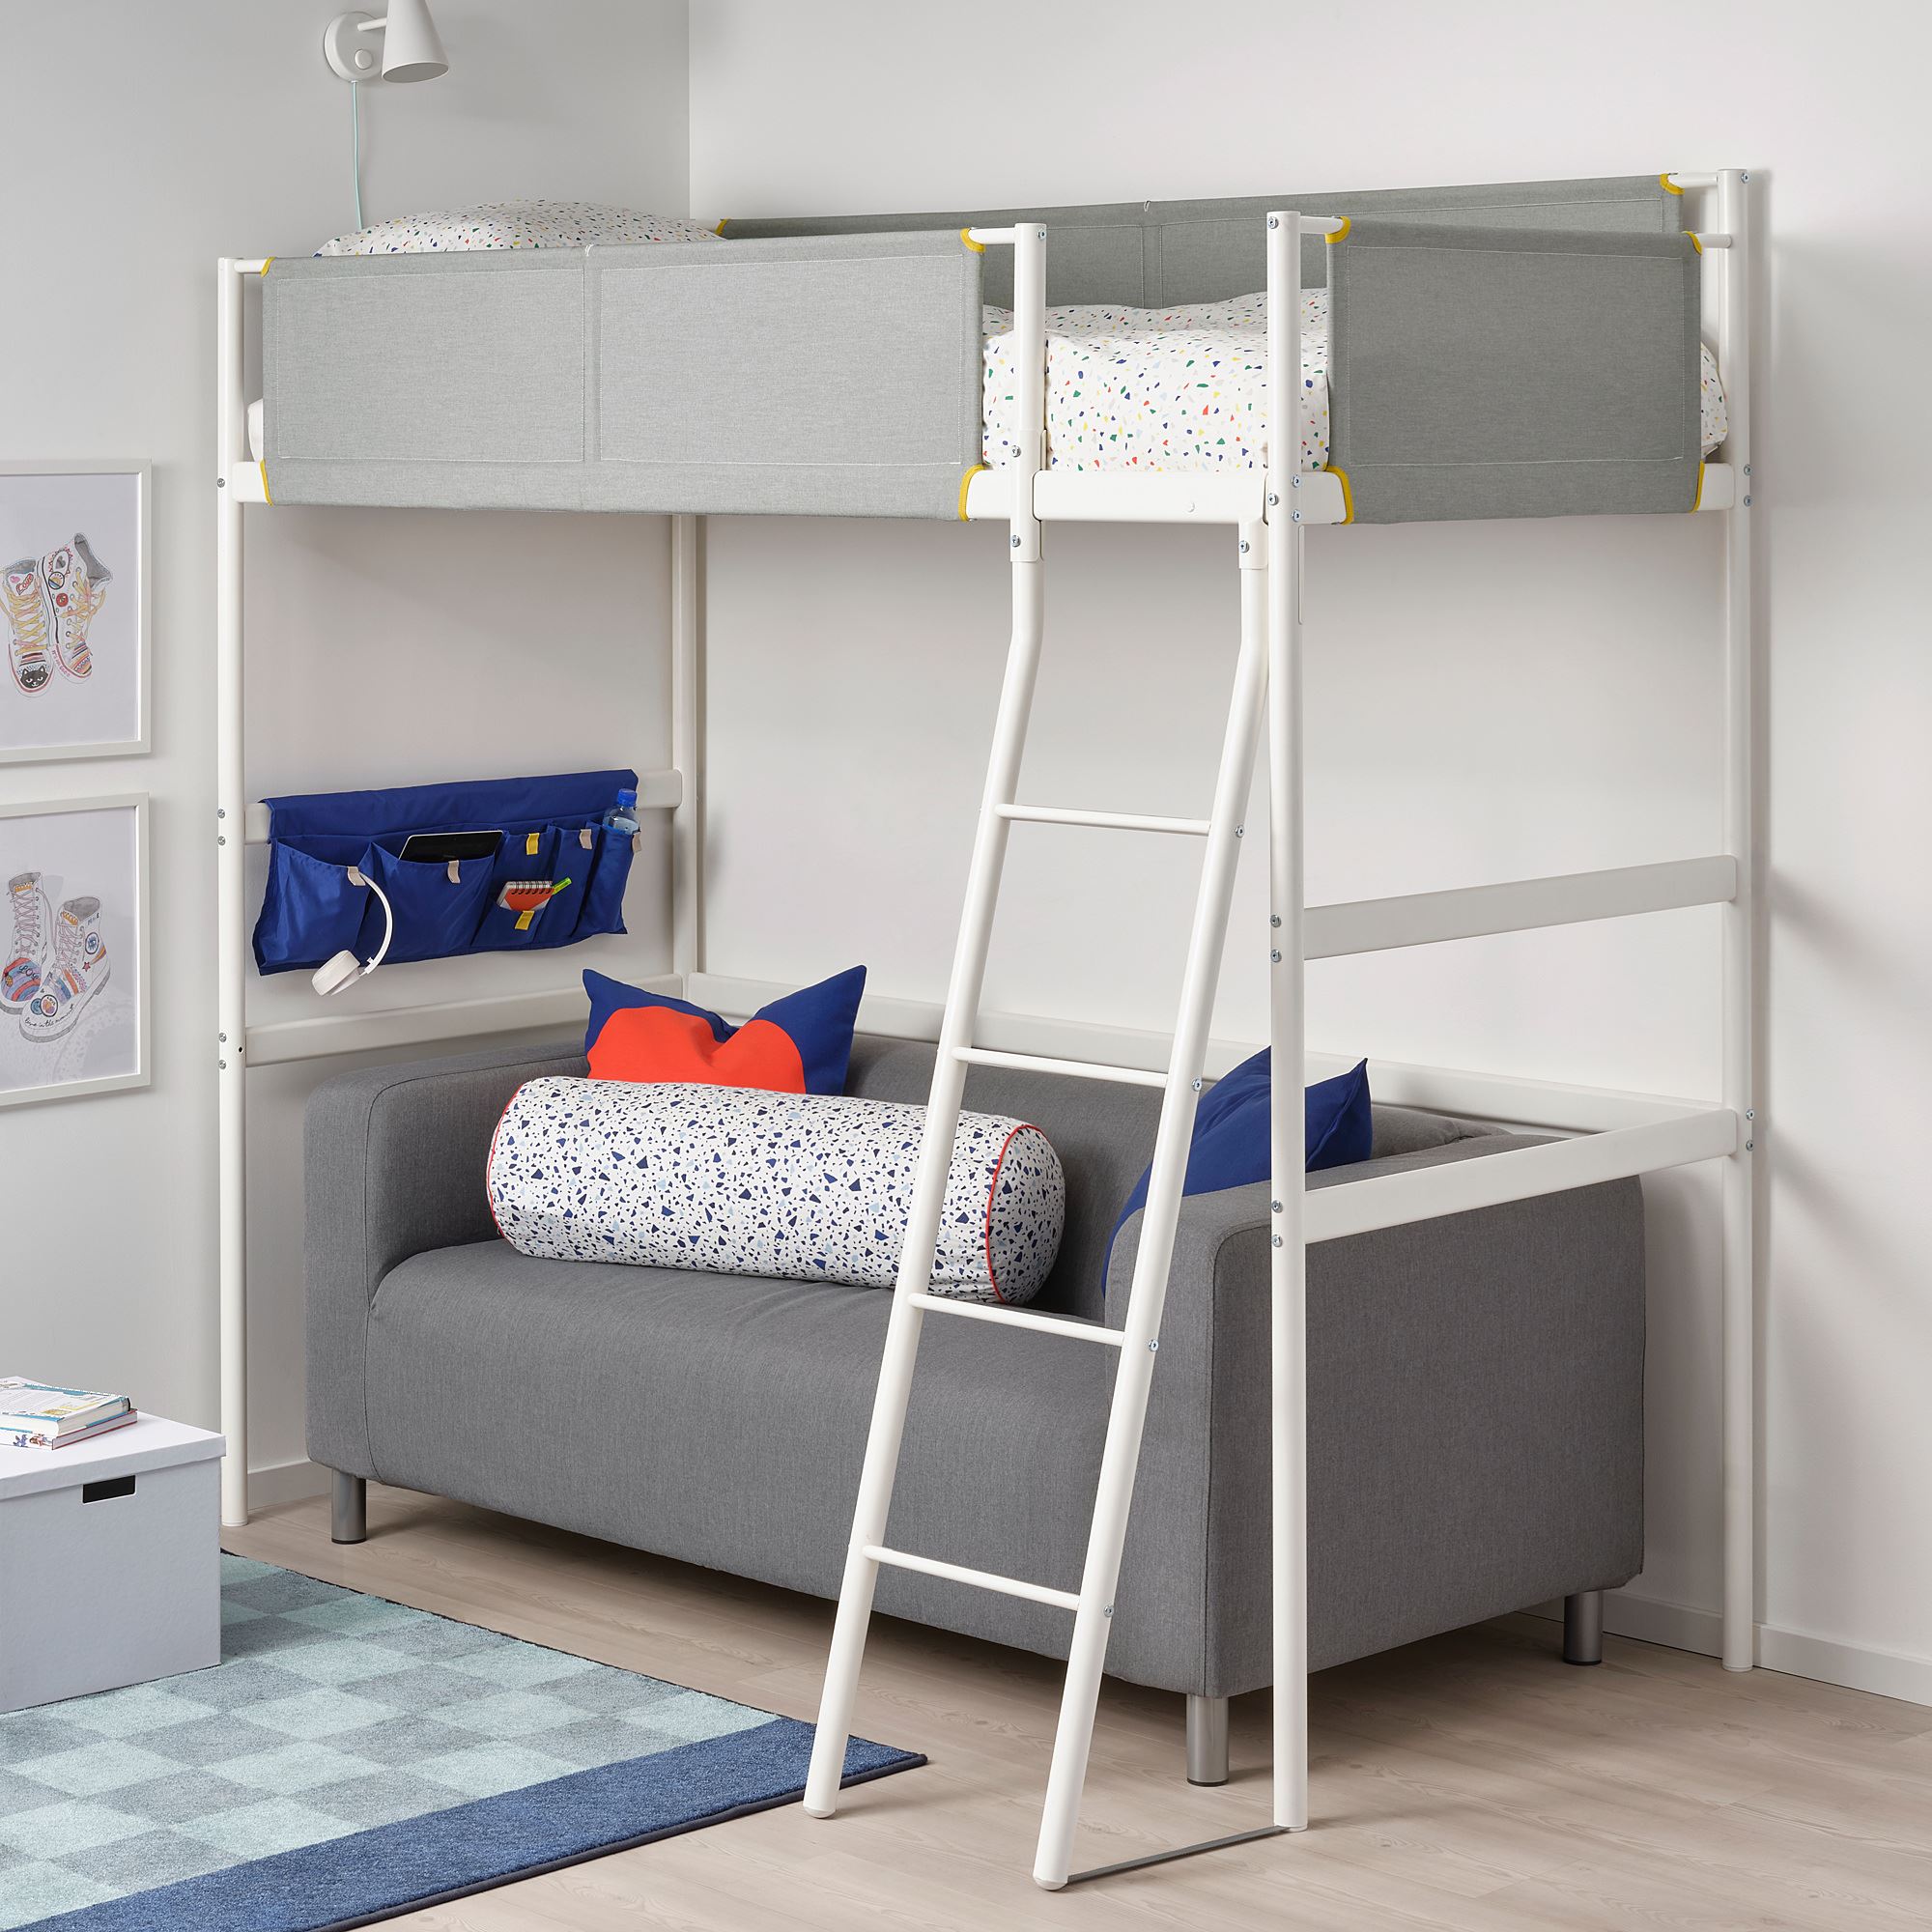 Childrens Bunk Beds Ikea Space Saving Kids Triple Bunk Beds Ikea Hackers Ikea Hackers This Room Proves That You Can Still Create A Functional Stylish Bedroom In A Small Area Louisvuittonmocassini